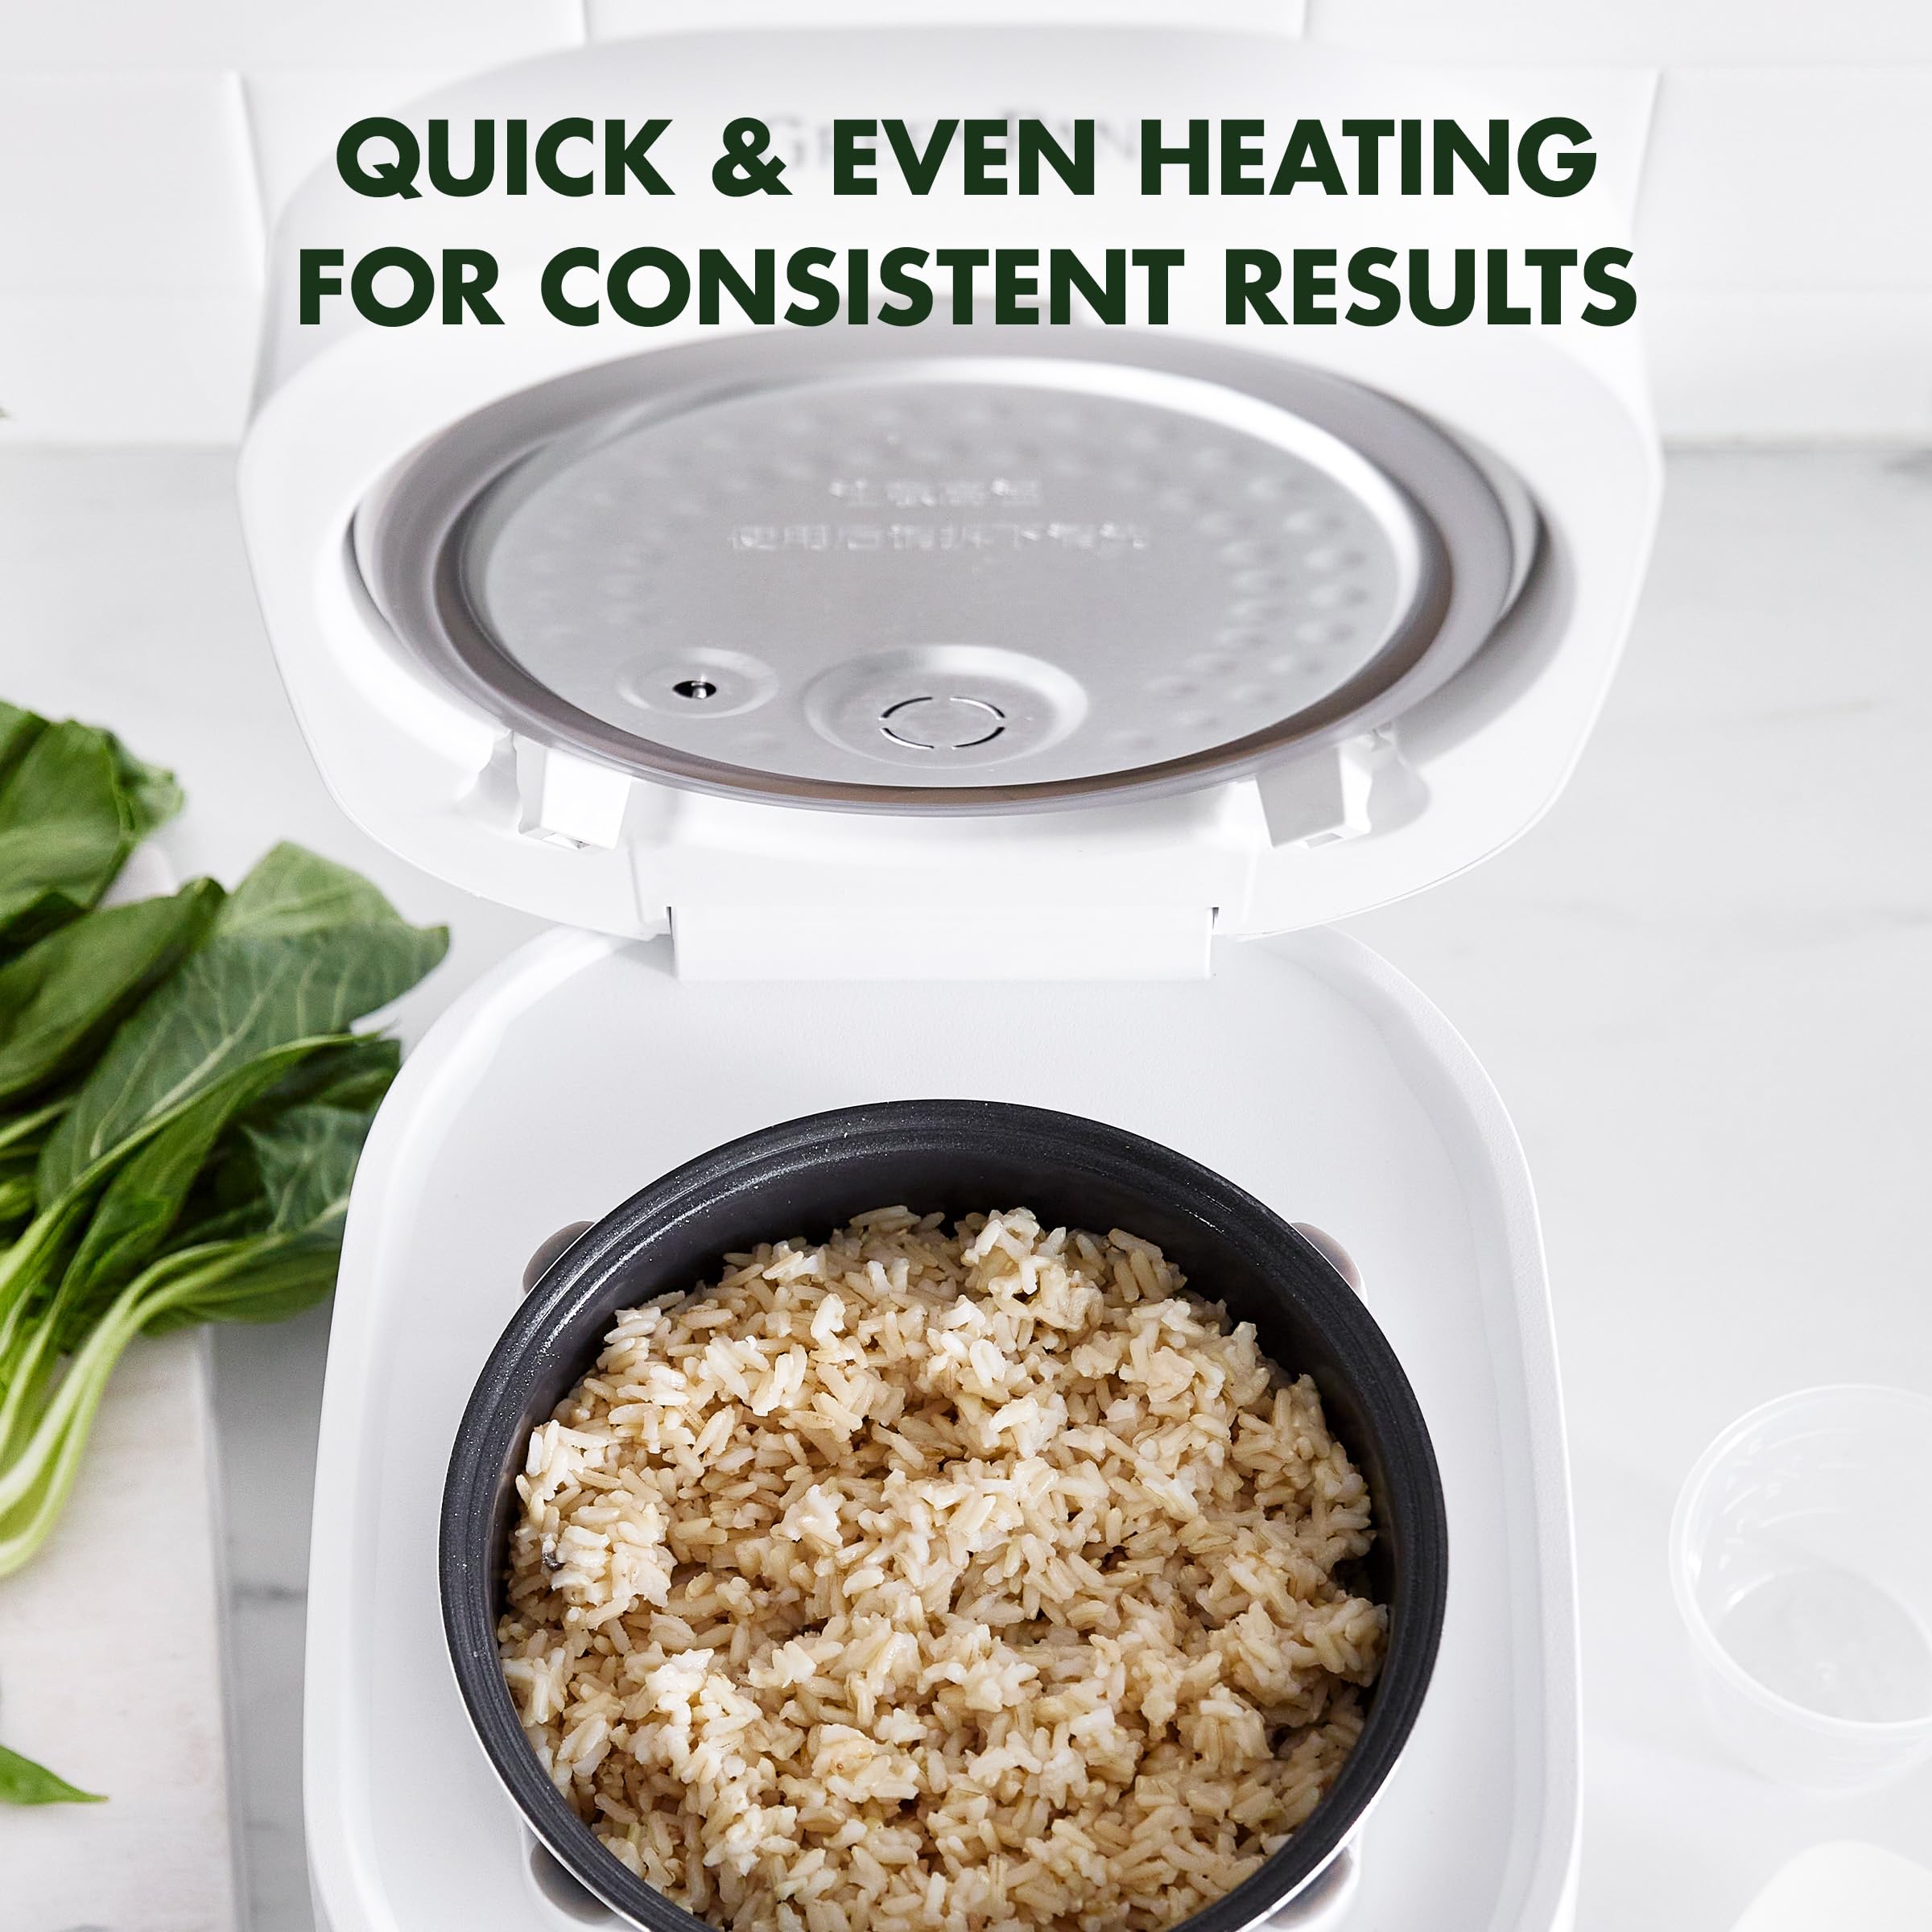 GreenPan Healthy Ceramic Nonstick Rice Quinoa Steel Cut Oats & Grains Cooker,Easy Meal Presets,4 Cups Uncooked (8 Cooked),Cool Touch,Compact,Warms, Steam,Removeable Bowl,Spatula Ladle&Cup, White